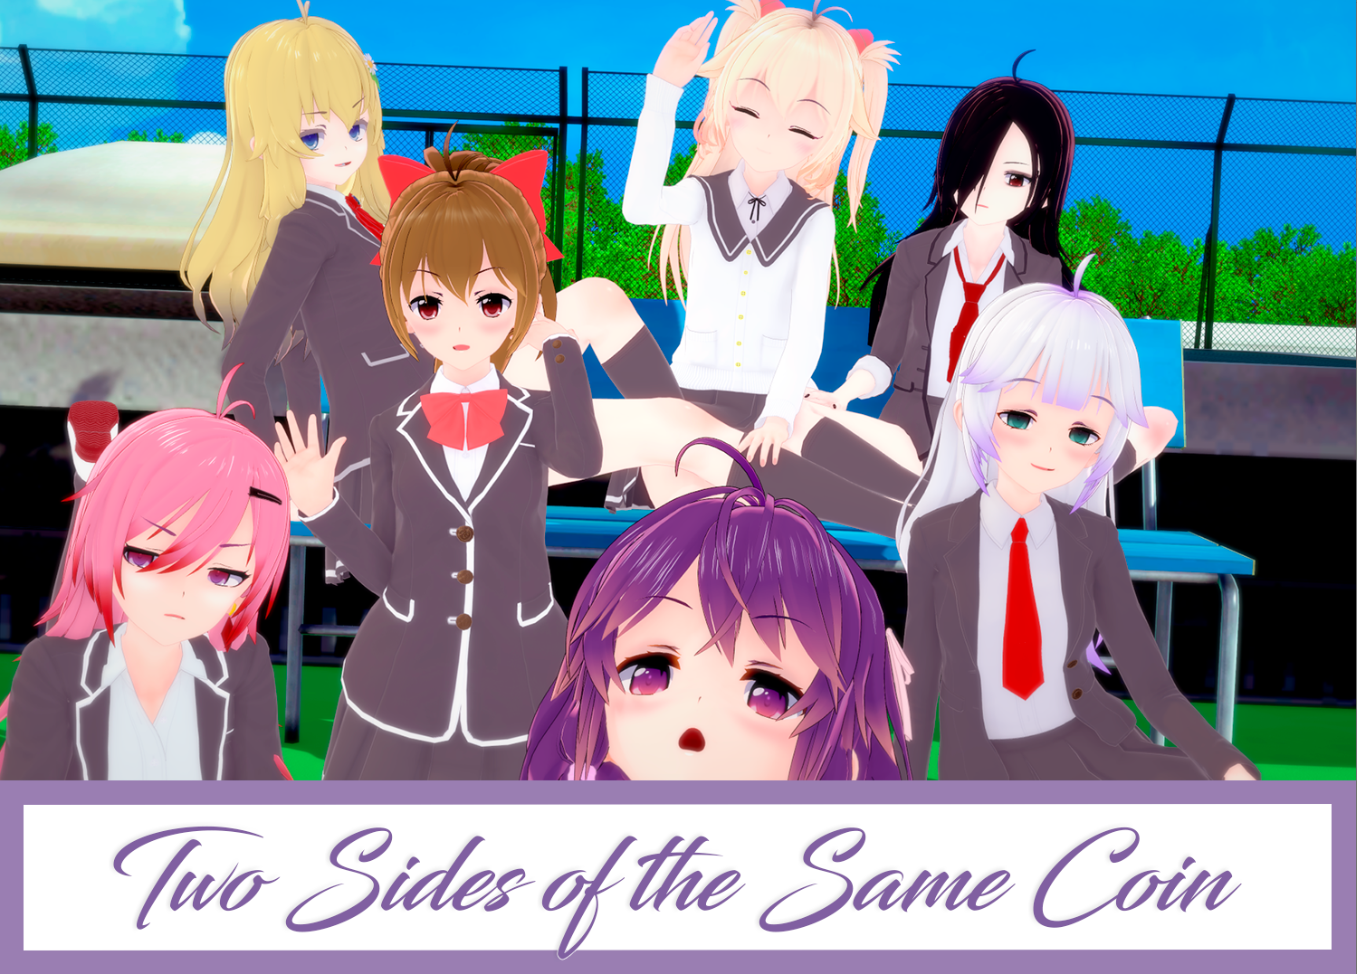 [18+ EN] Two Sides of the Same Coin – Hai Mặt Của Một Đồng Xu | Android, PC